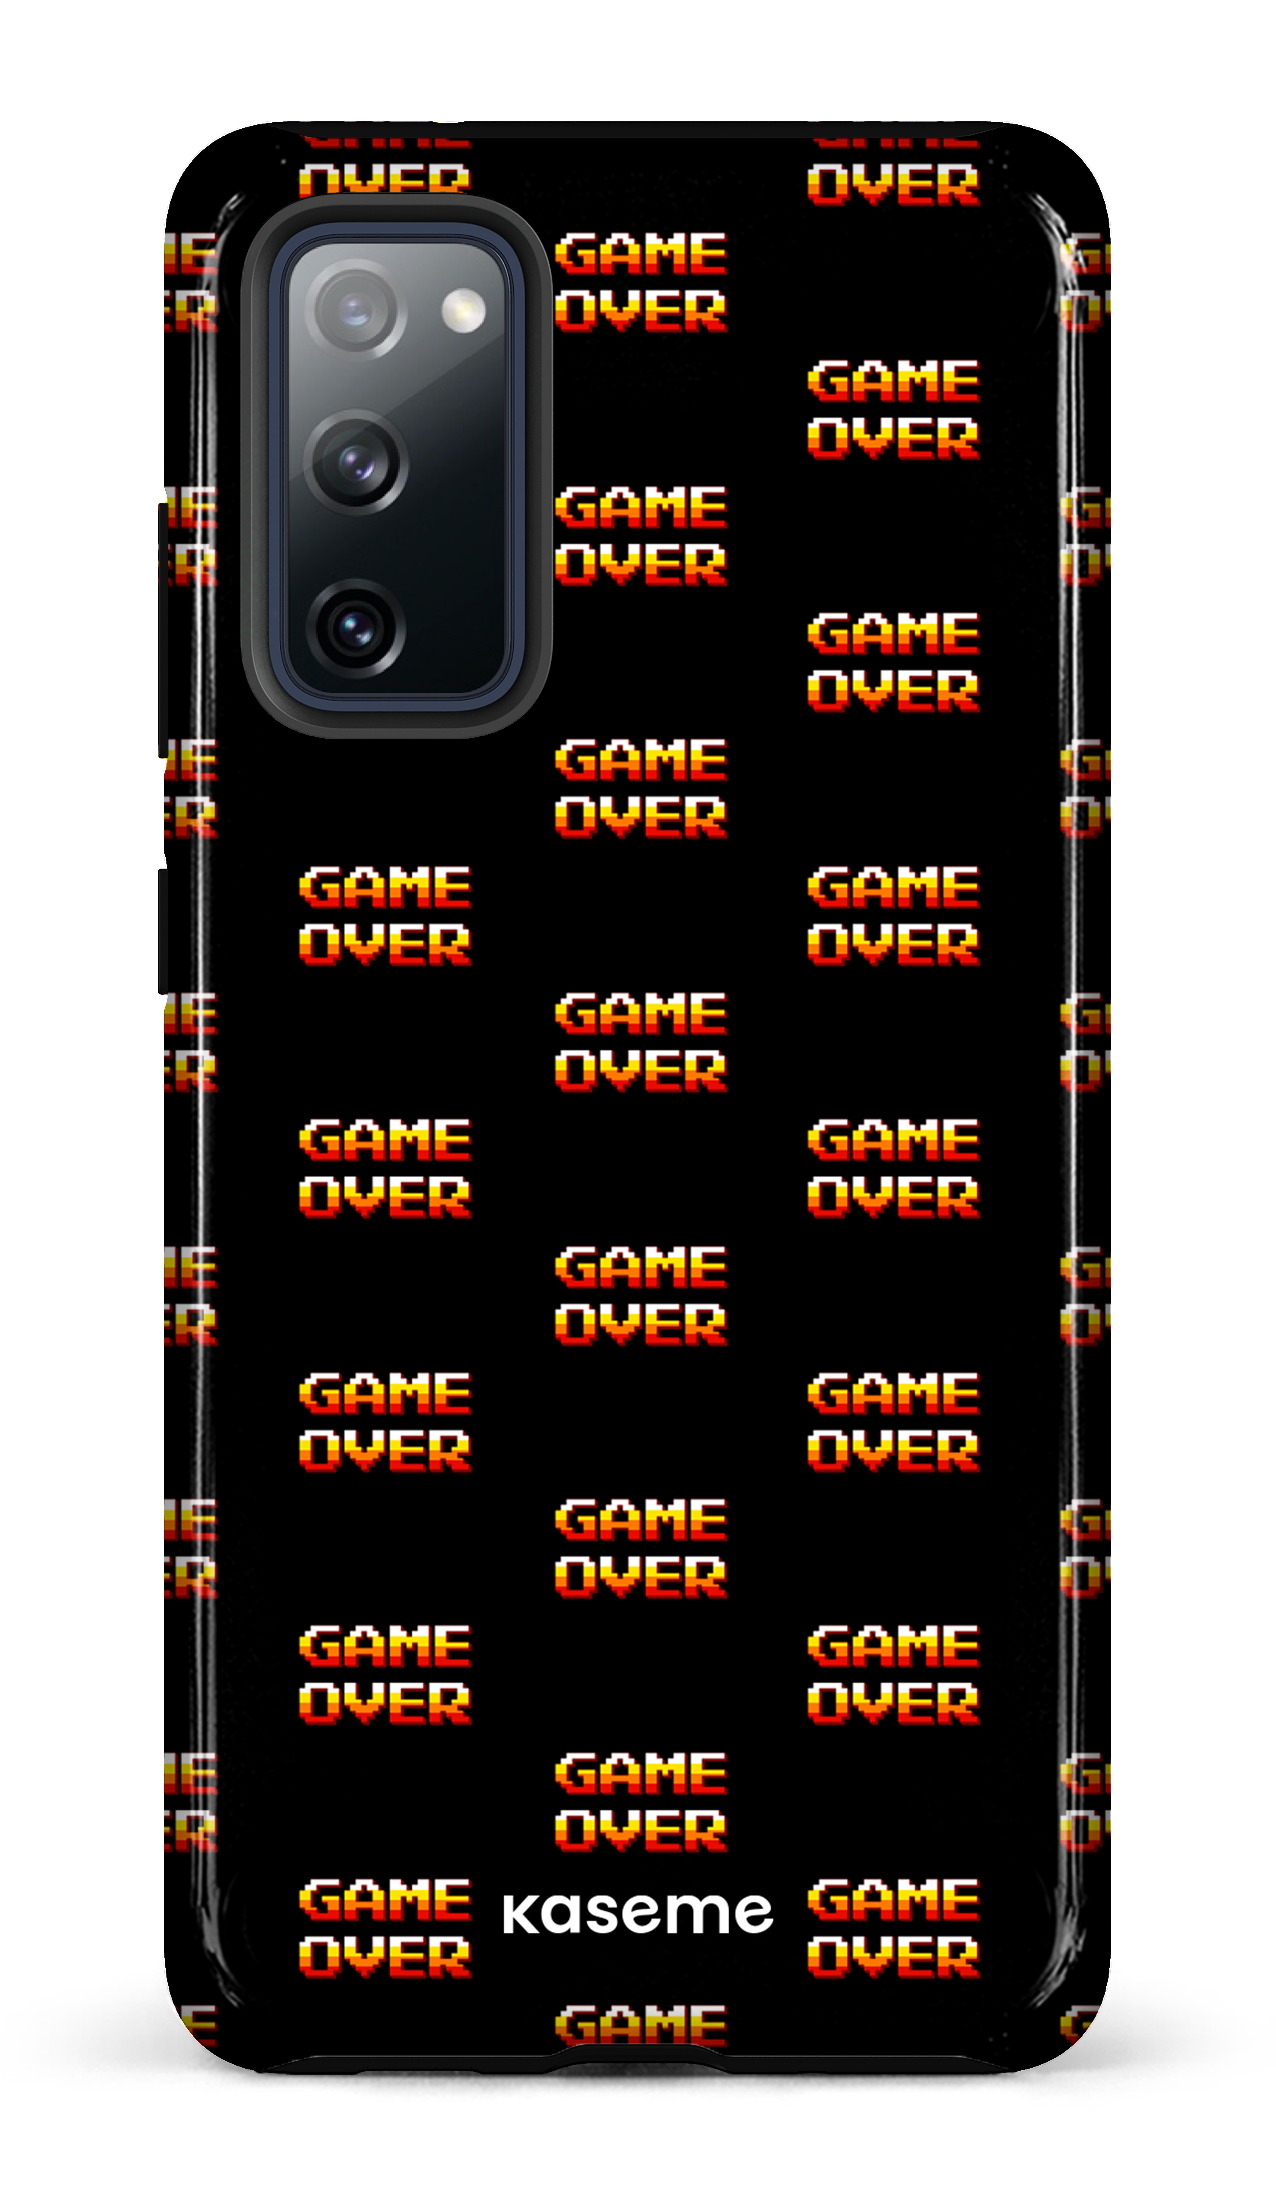 Game Over by Mathieu Pellerin - Galaxy S20 FE